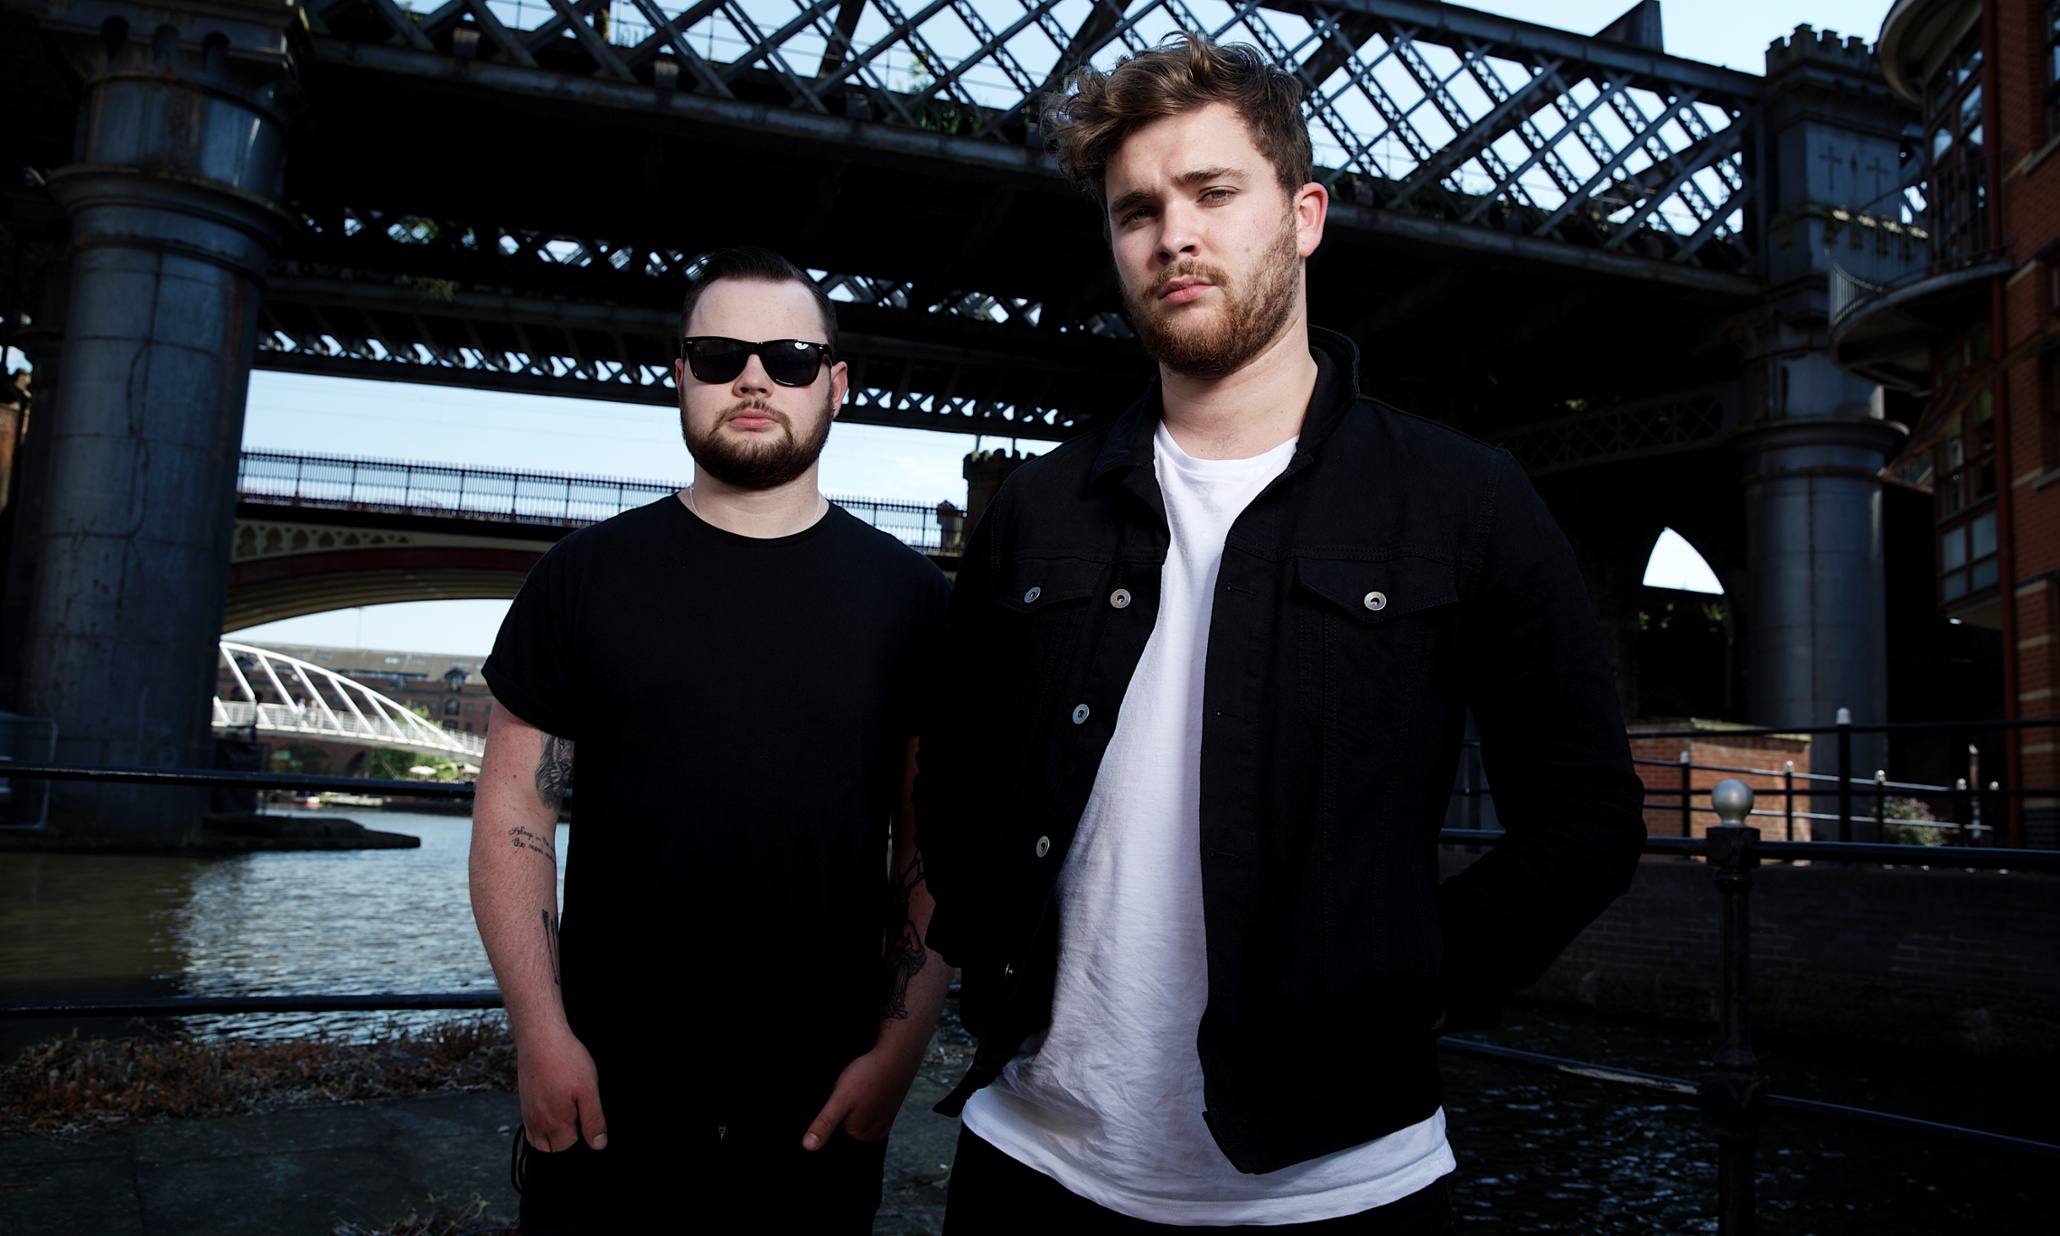 HD wallpaper featuring two members of the band styled for the 'Royal Blood' theme, posing confidently in front of an urban bridge.